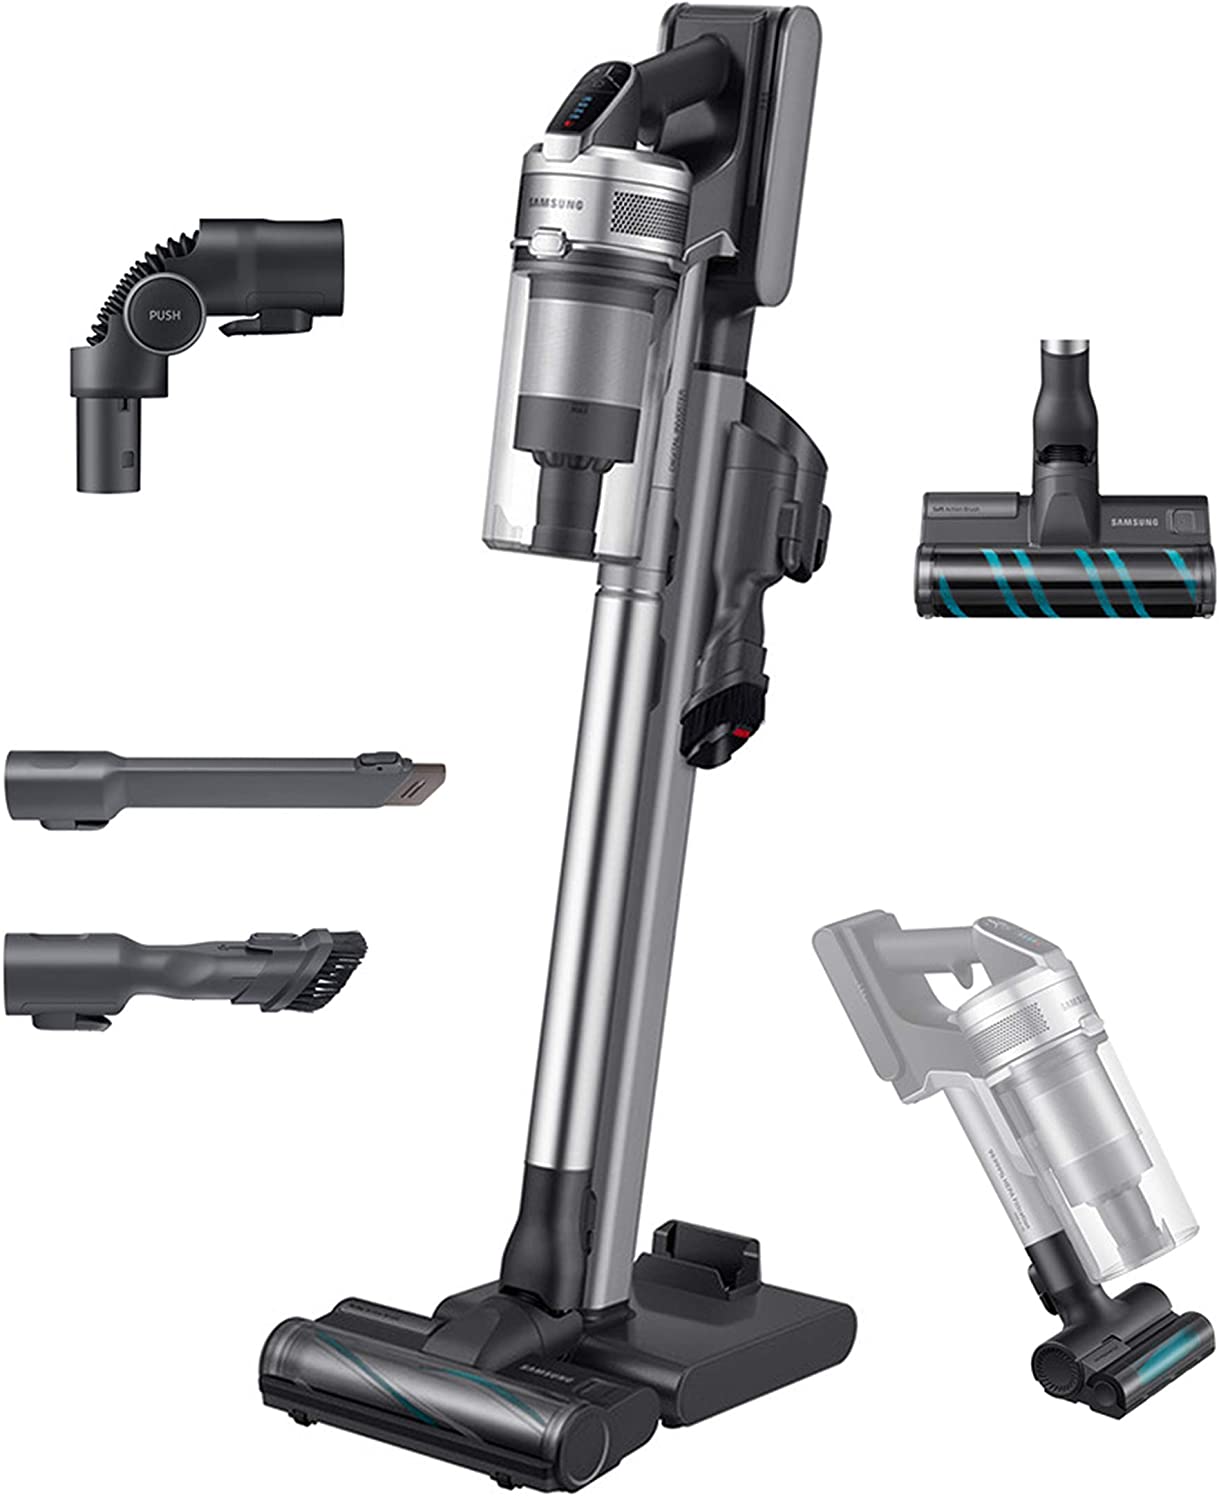 SAMSUNG Jet 90 Complete Cordless Stick Vacuum with Dual Charging Station - VS20R9046T3AA - image 1 of 1